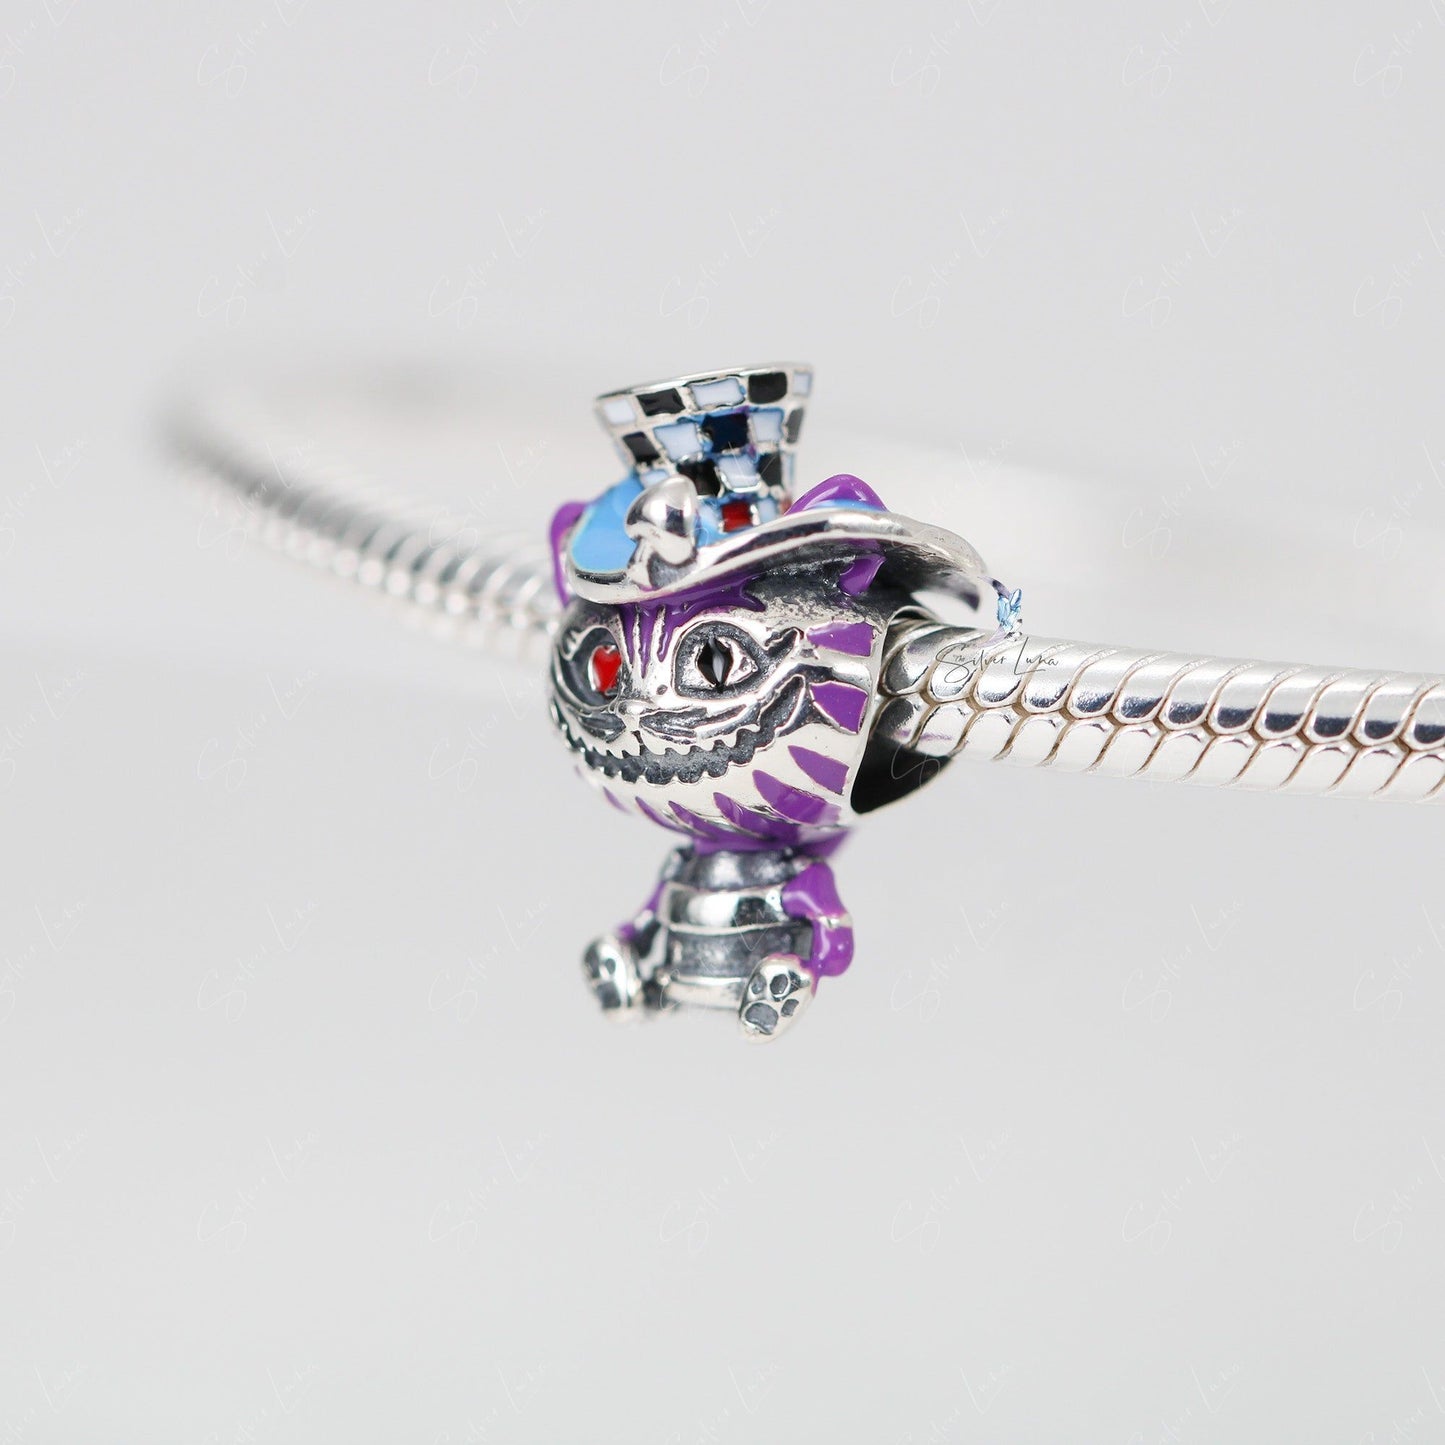 The Cheshire Cat silver charm for bracelet